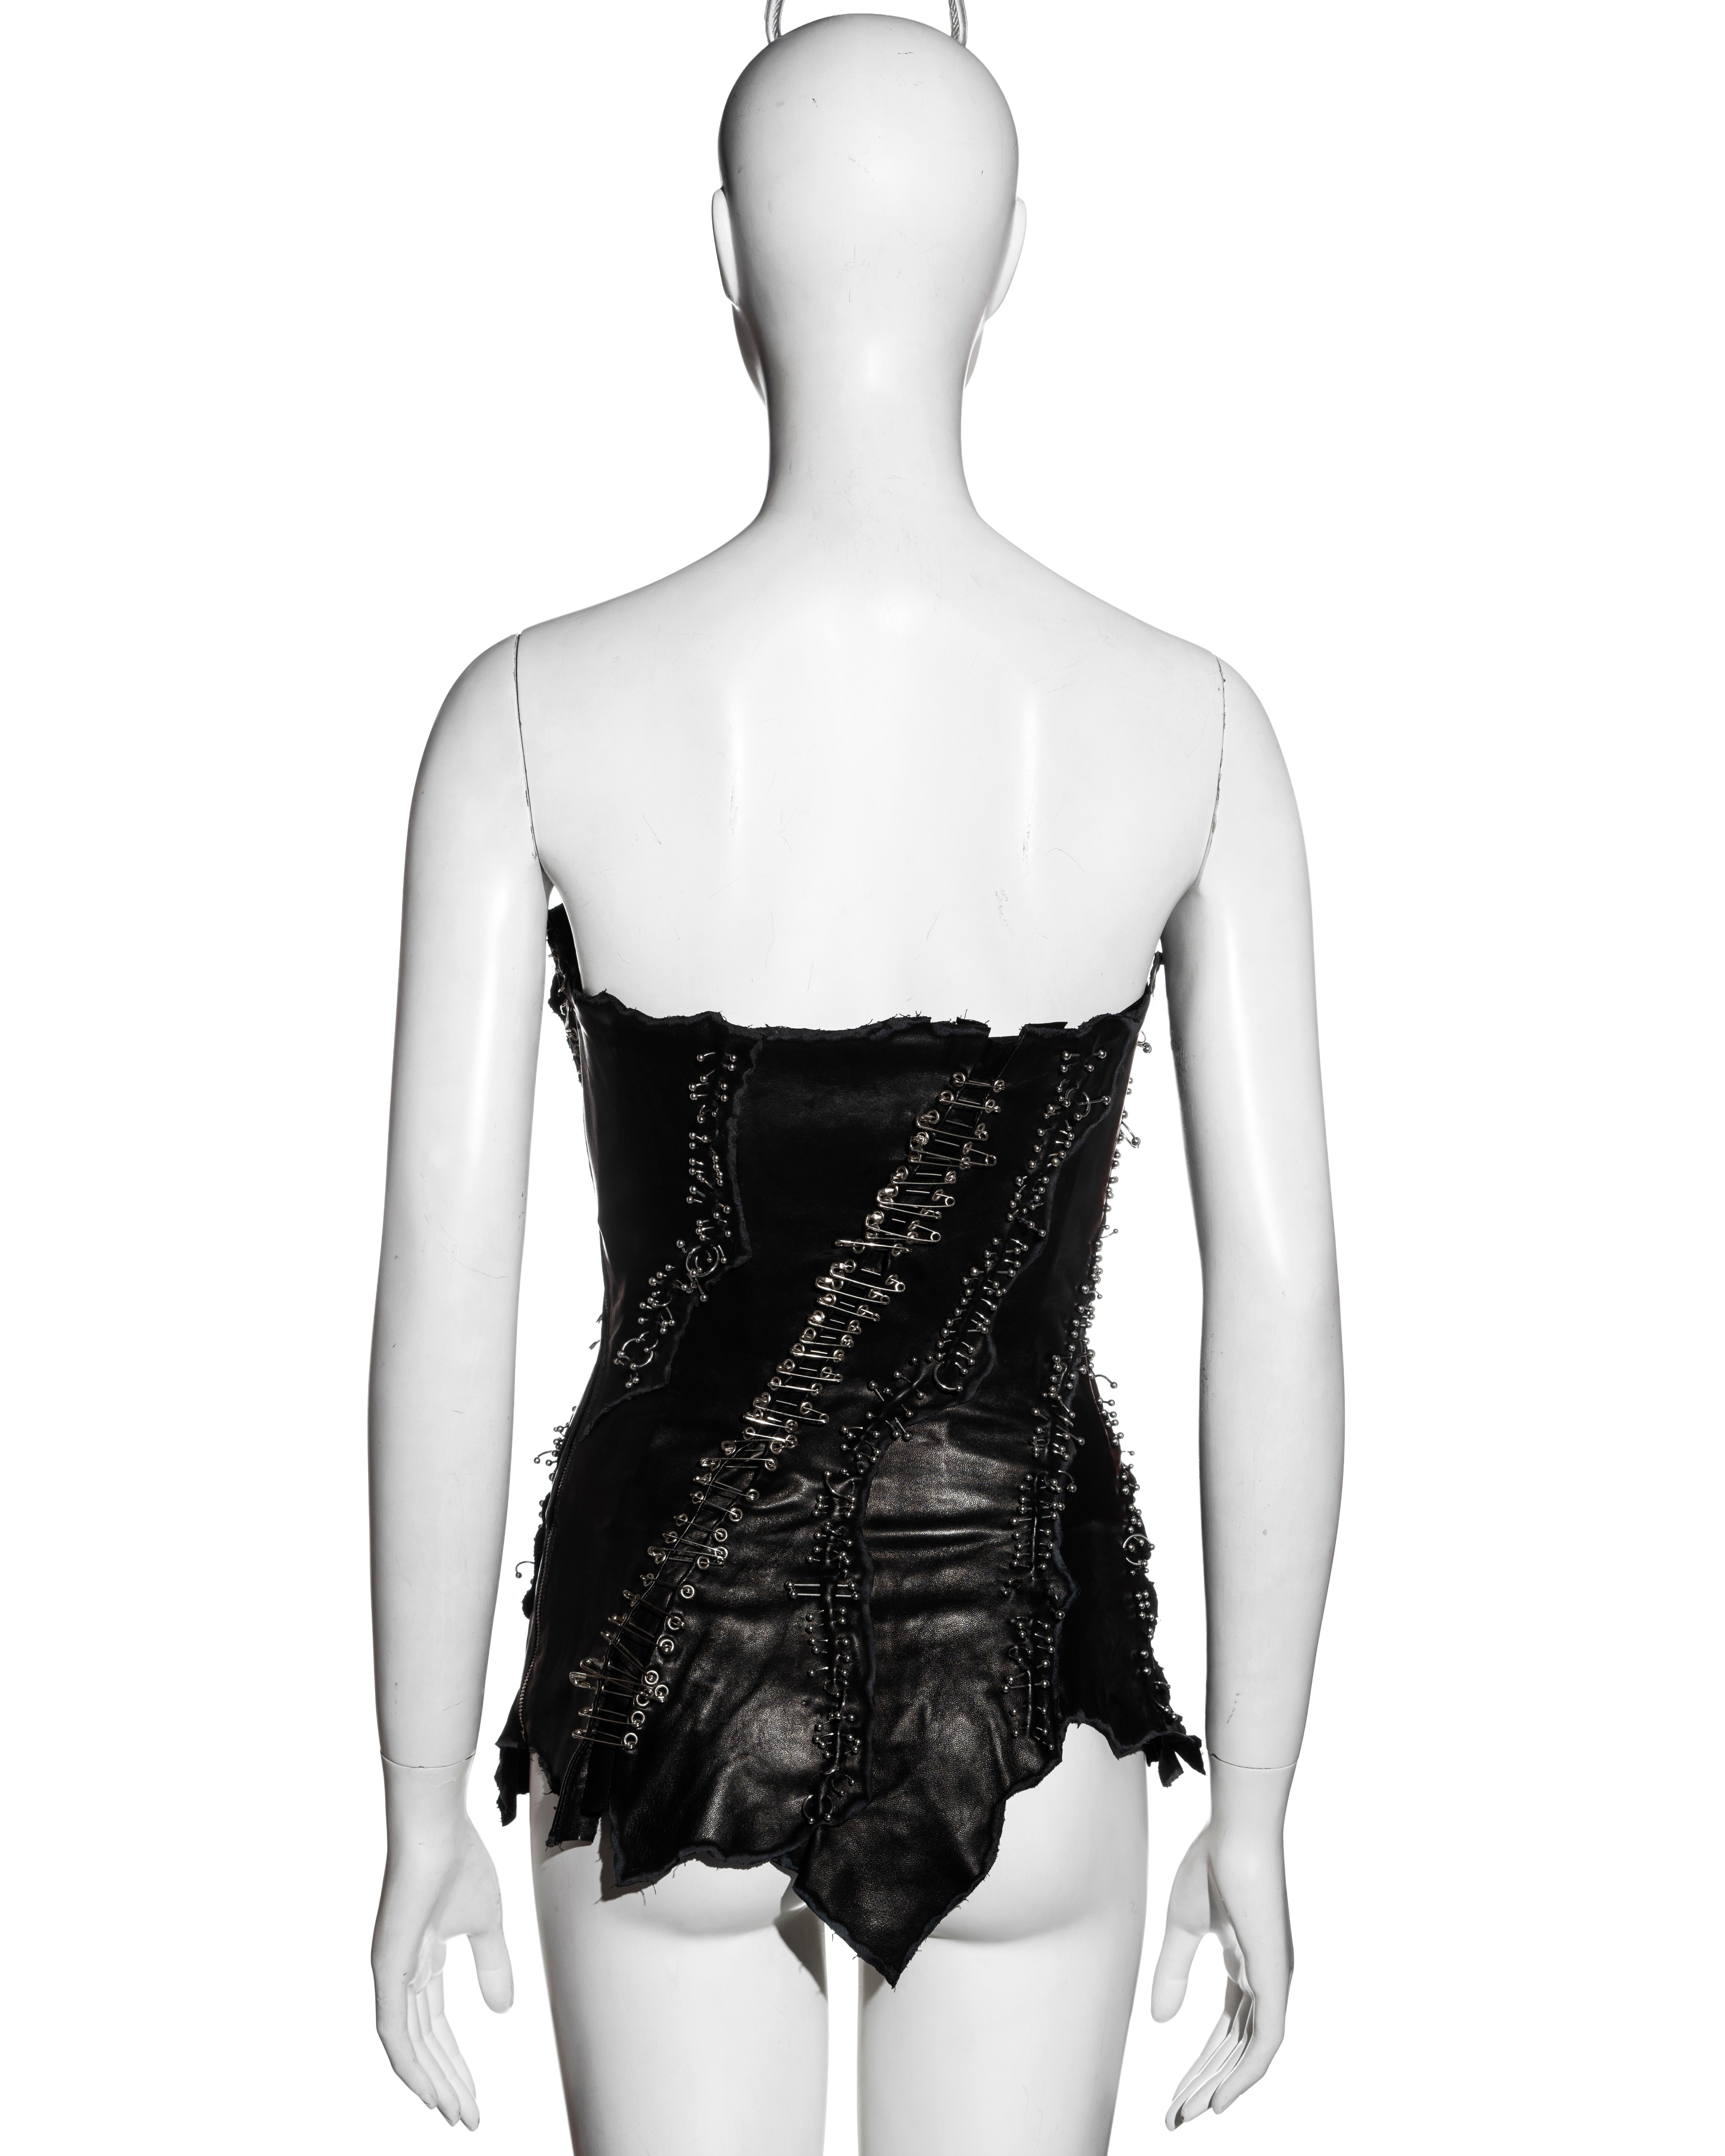 Women's Balmain by Christophe Decarnin black leather safety-pin corset, ss 2011 For Sale